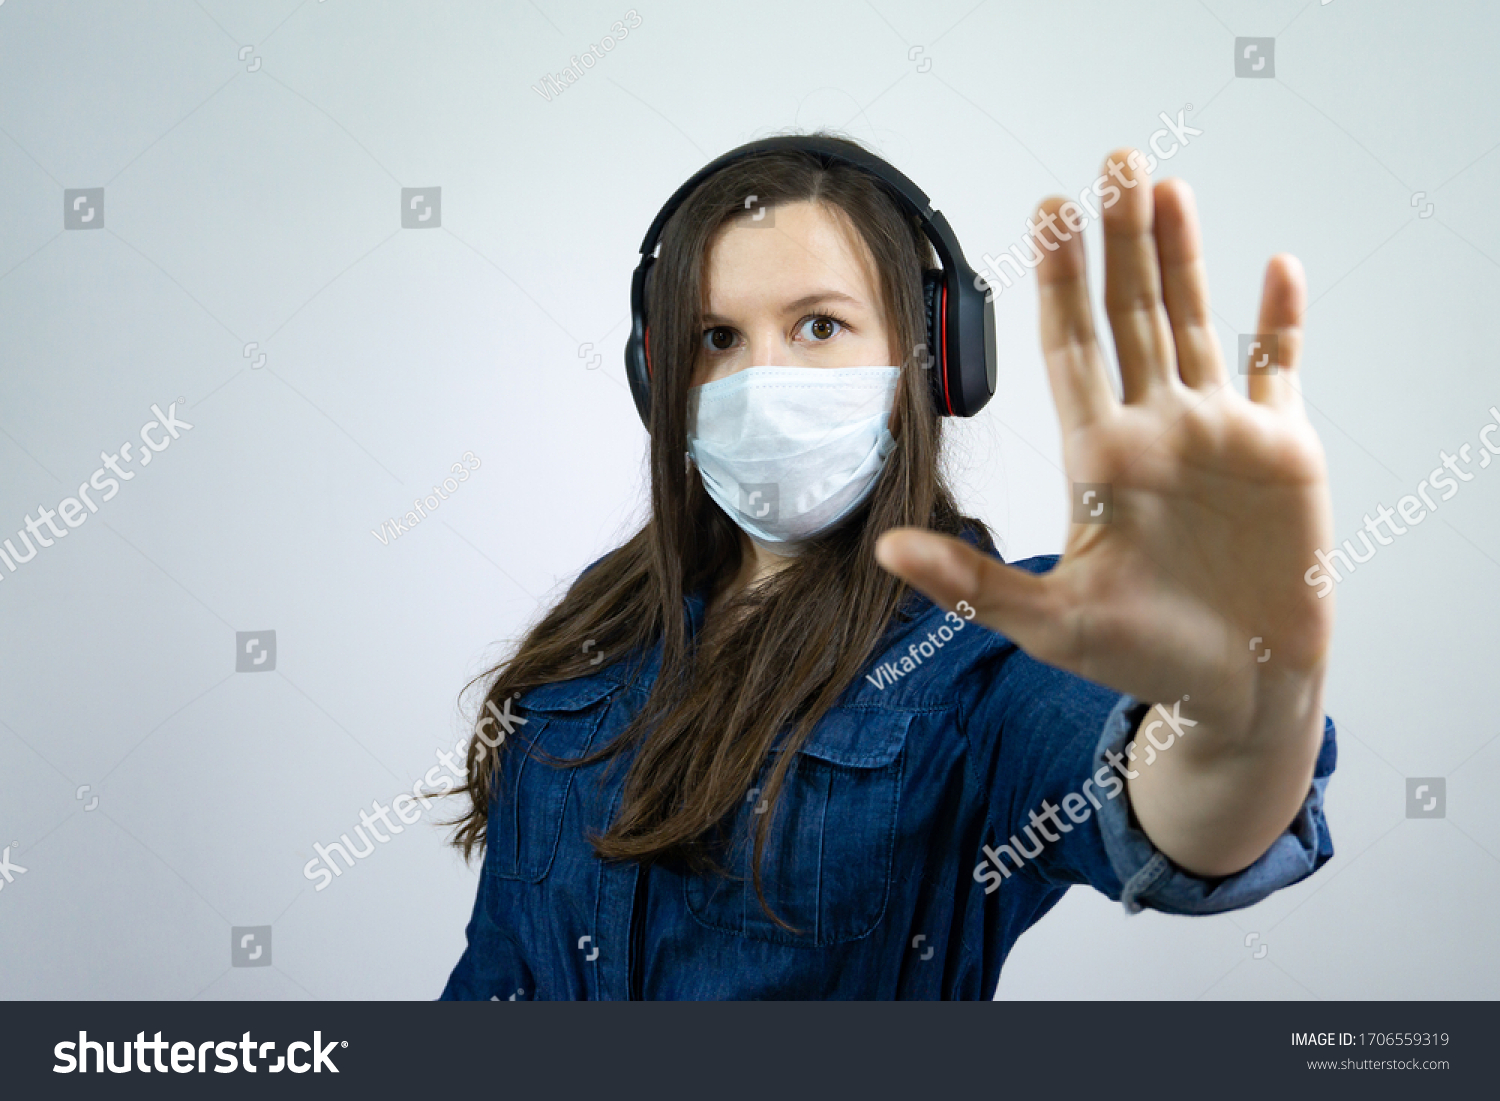 Help stop corona virus pandemic infectious disease outbreak. girl in mask with palm distance avoid communication #1706559319